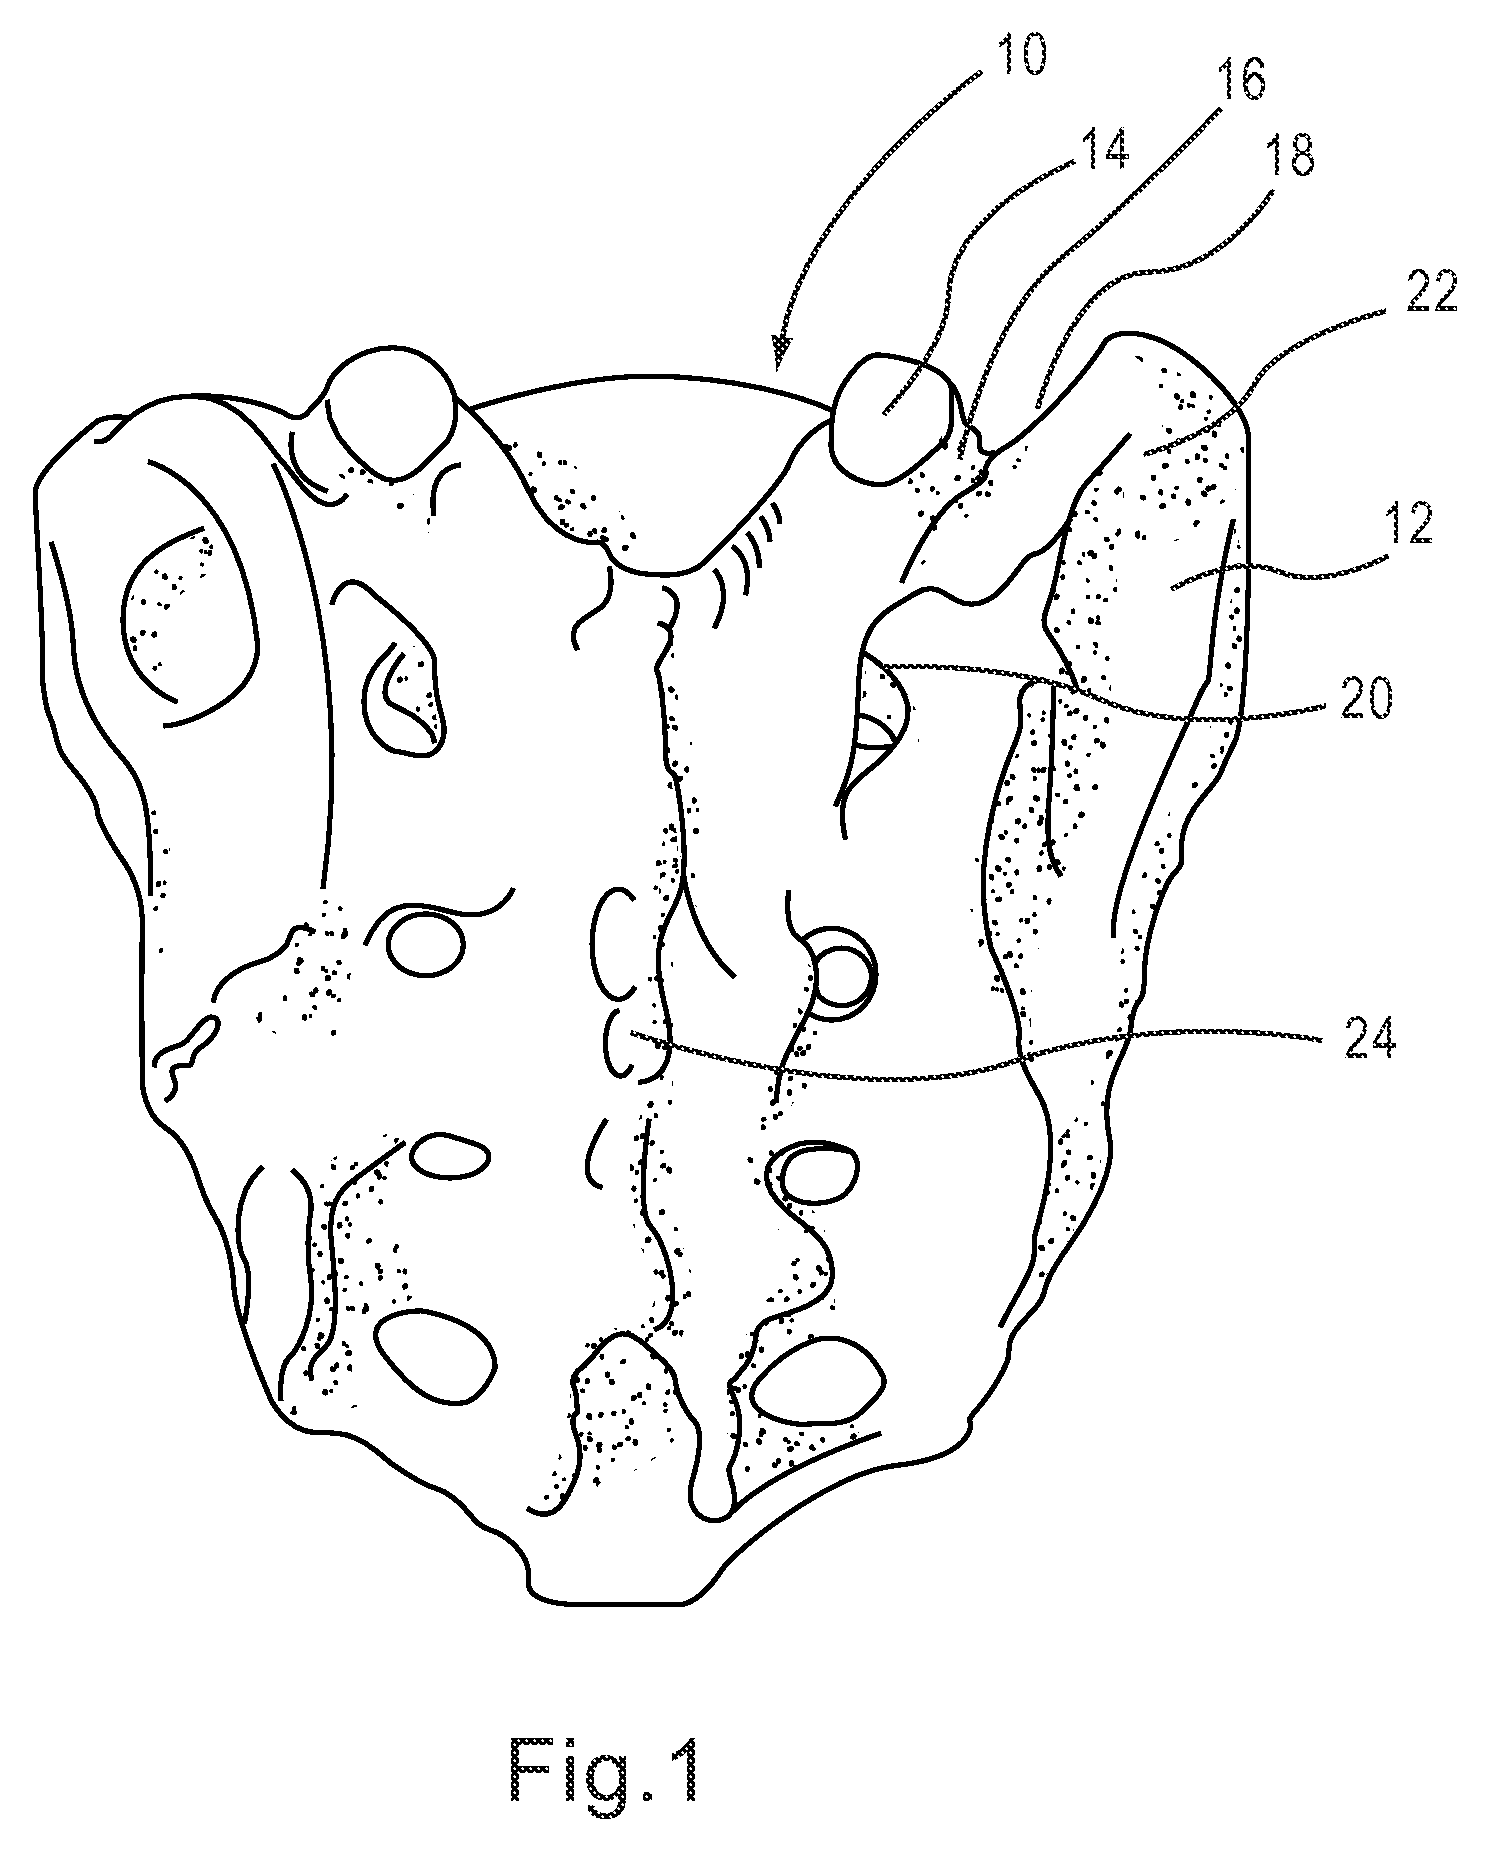 Kit and methods for medical procedures within a sacrum